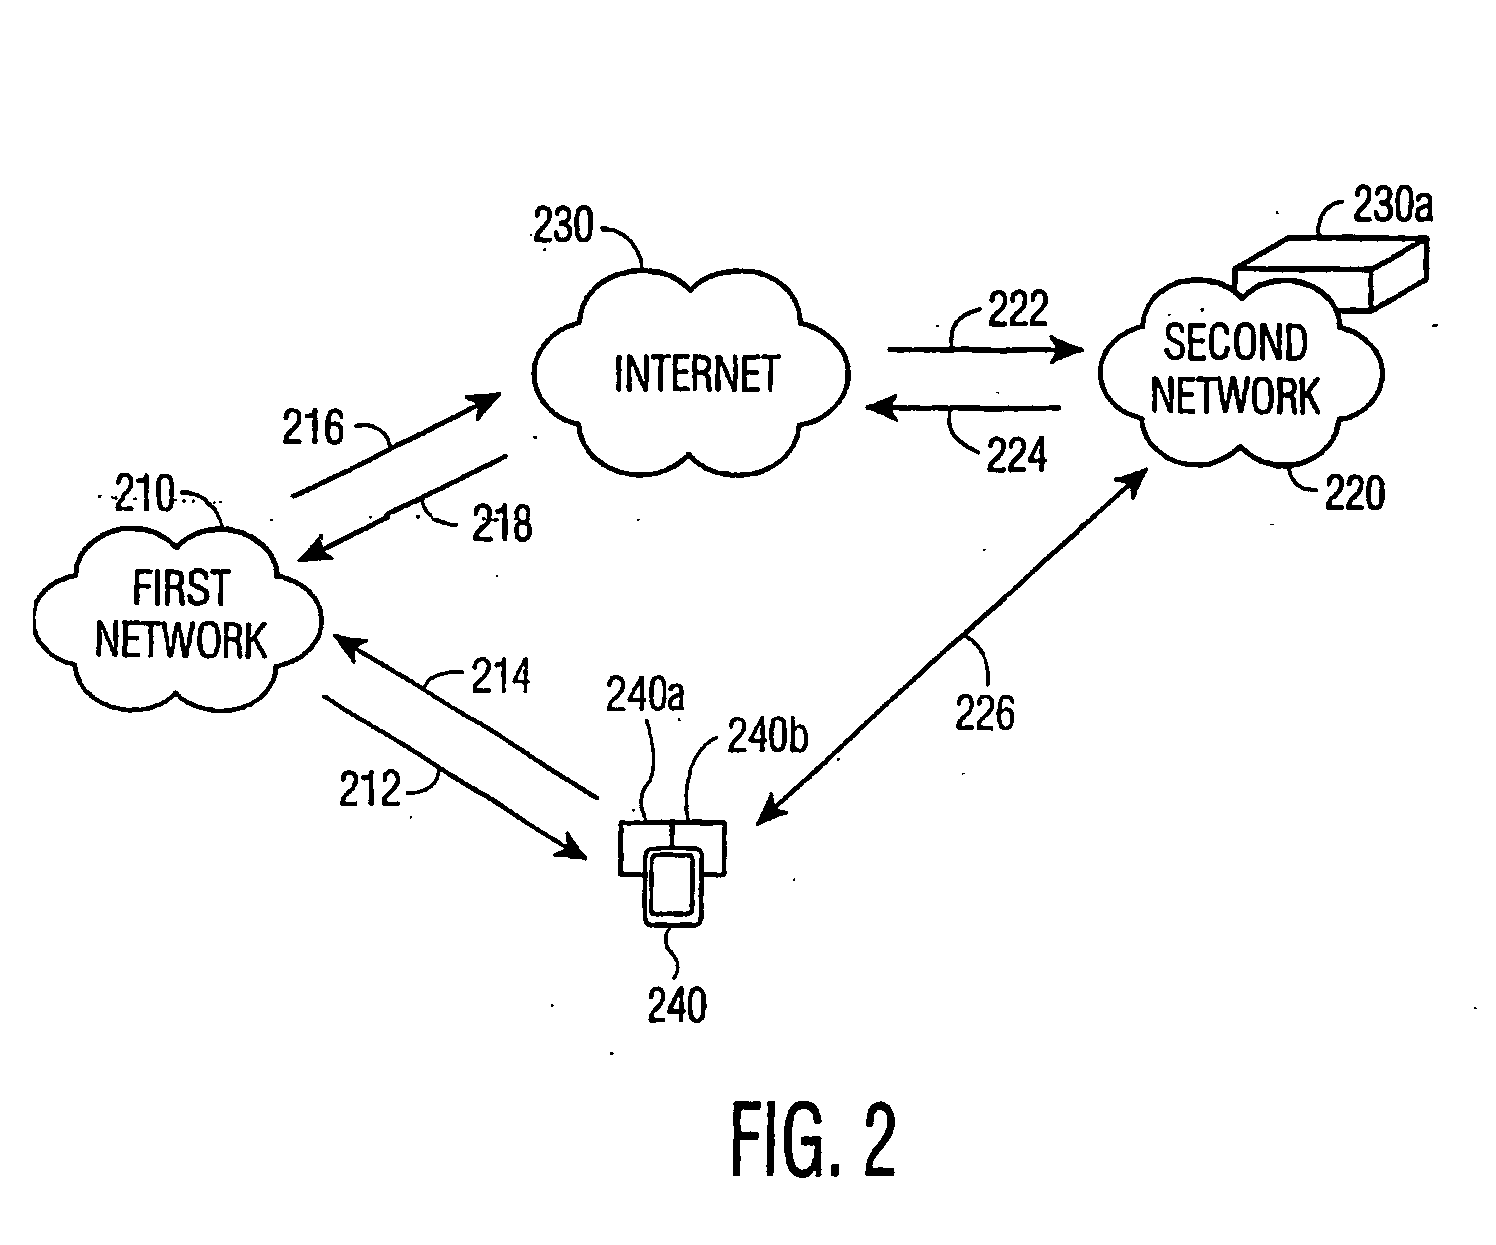 Transitive authentication authorization accounting in the interworking between access networks